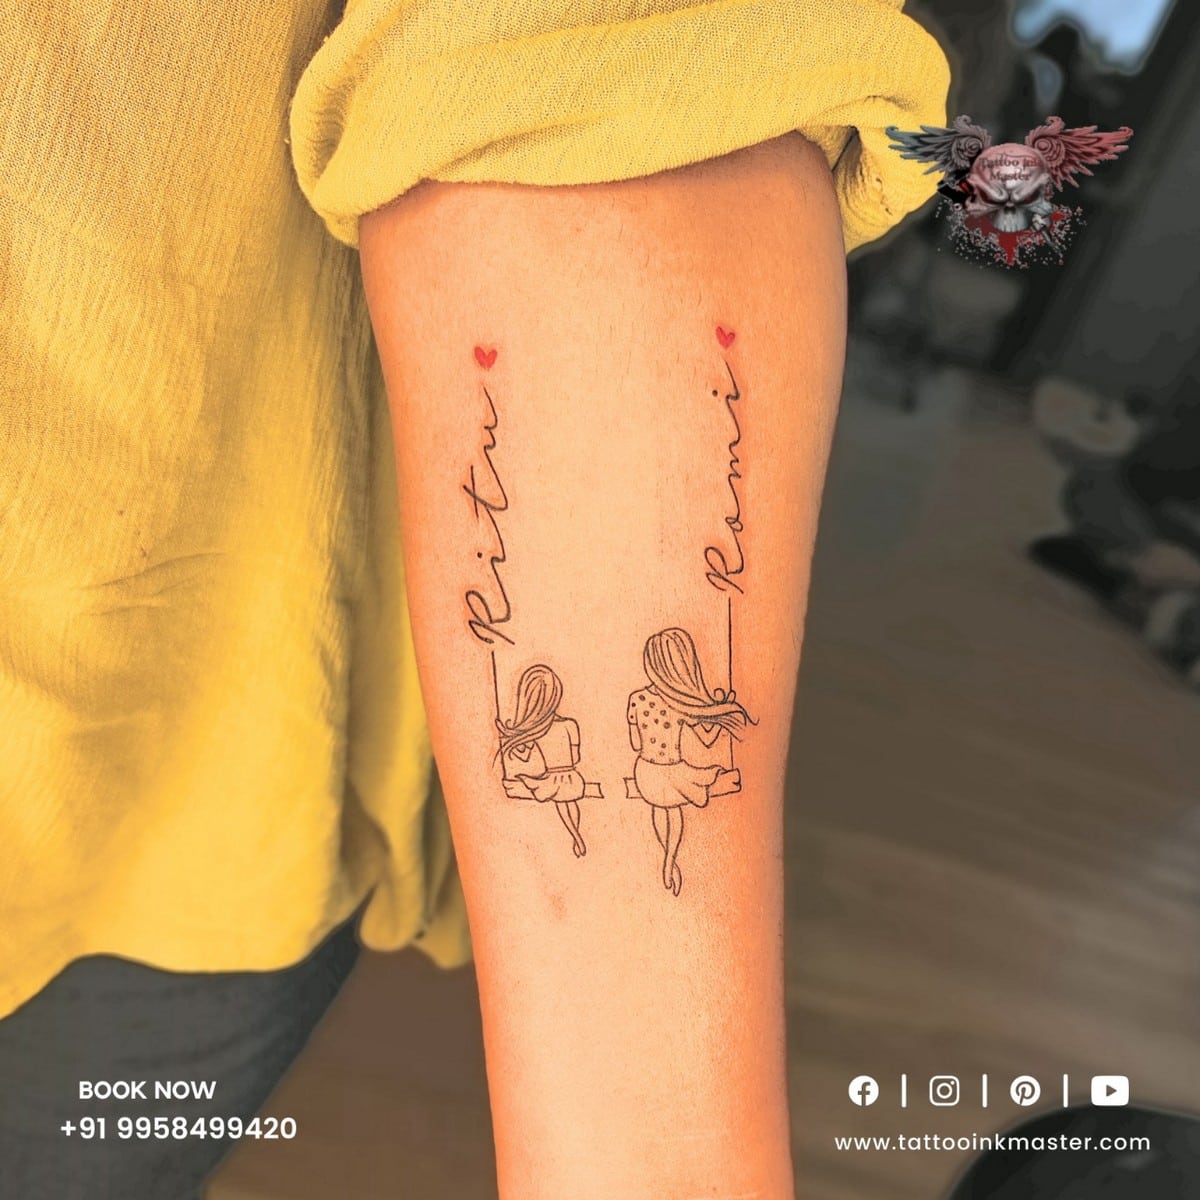 Rebels&Rustlers - Friendship tattoos 🥰 • Contact us for your appointment •  • • #ink #explore #butterfly #friendship #viral #butterflytattoo | Facebook